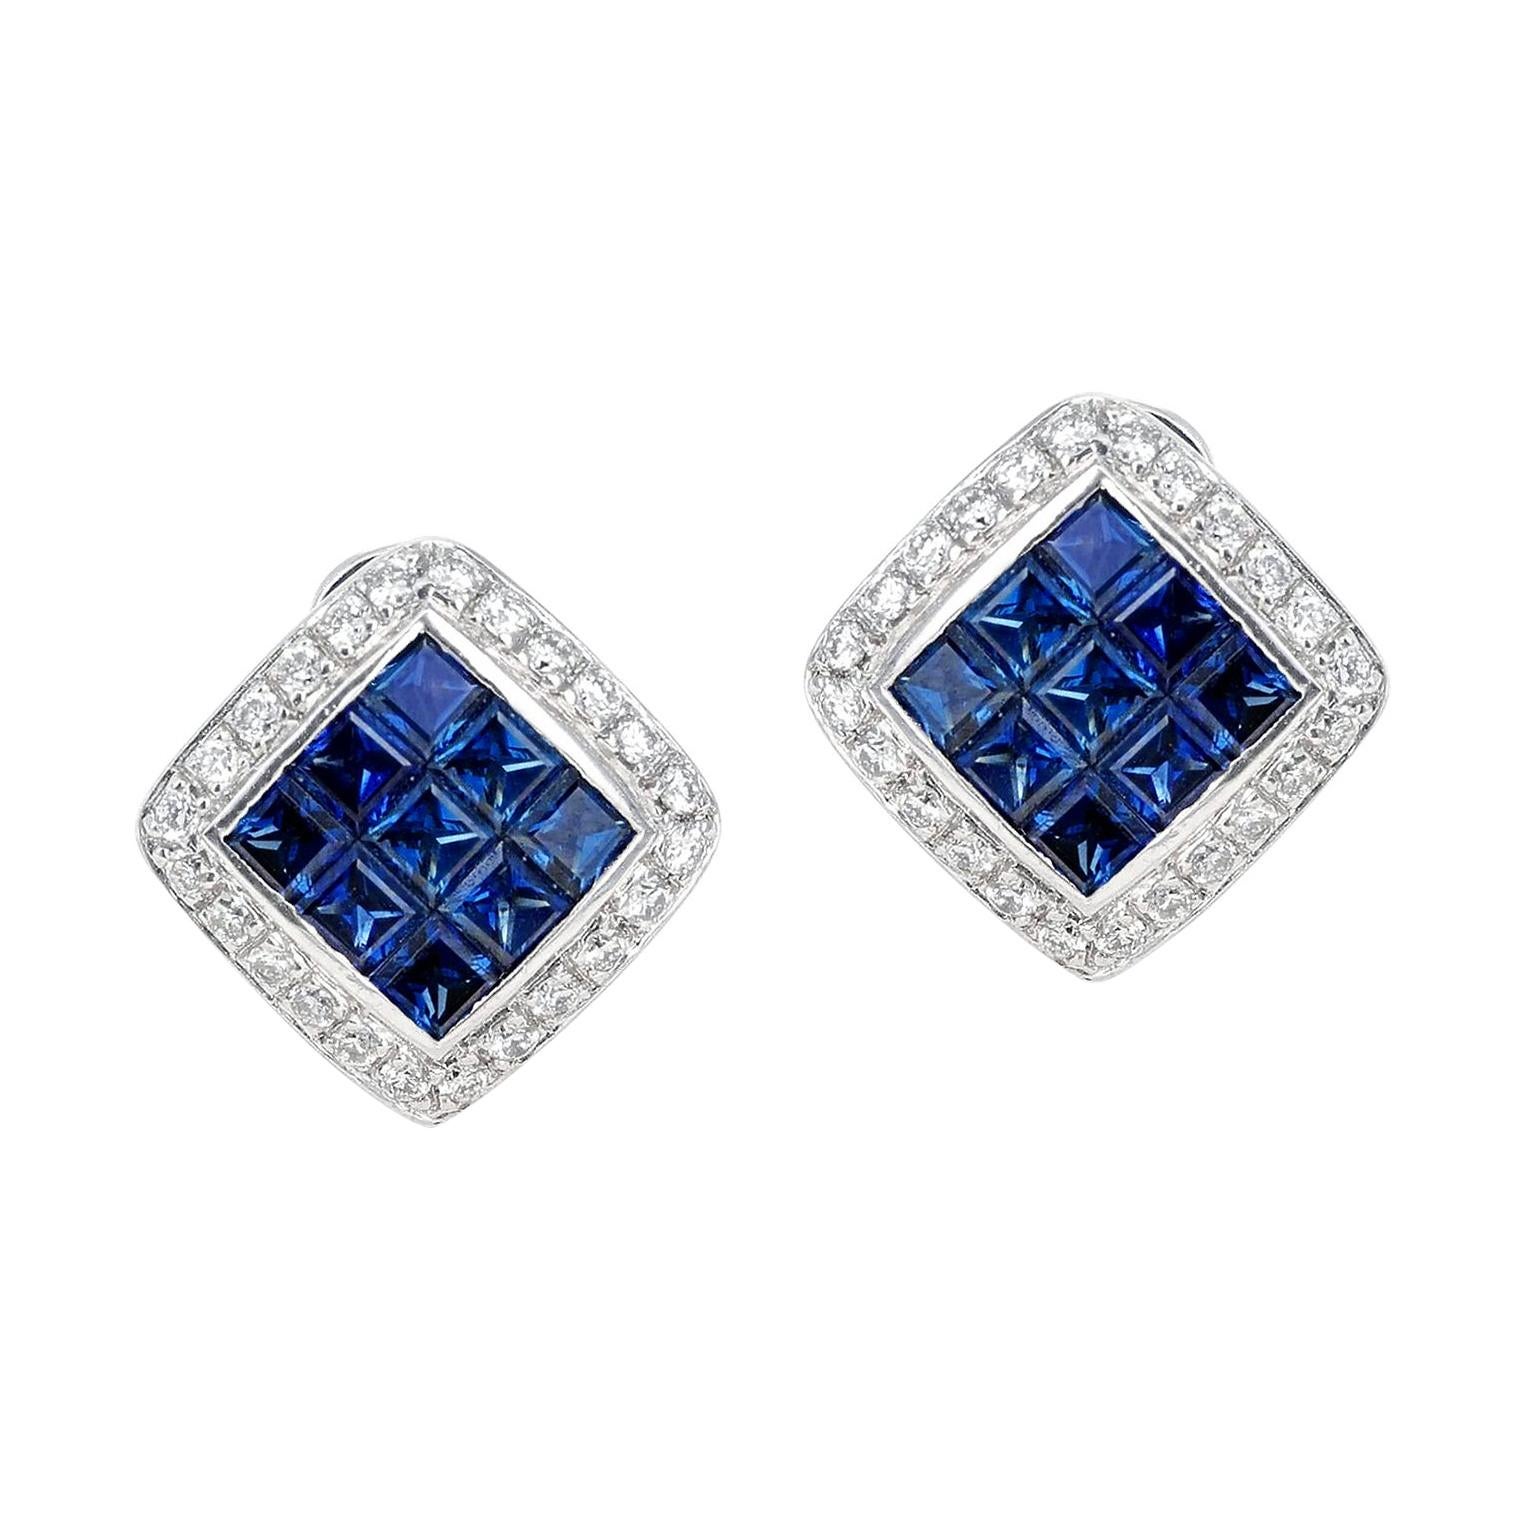 Square 3 Ct. Sapphire and Diamonds 0.60 Carats 18K White Gold Earrings